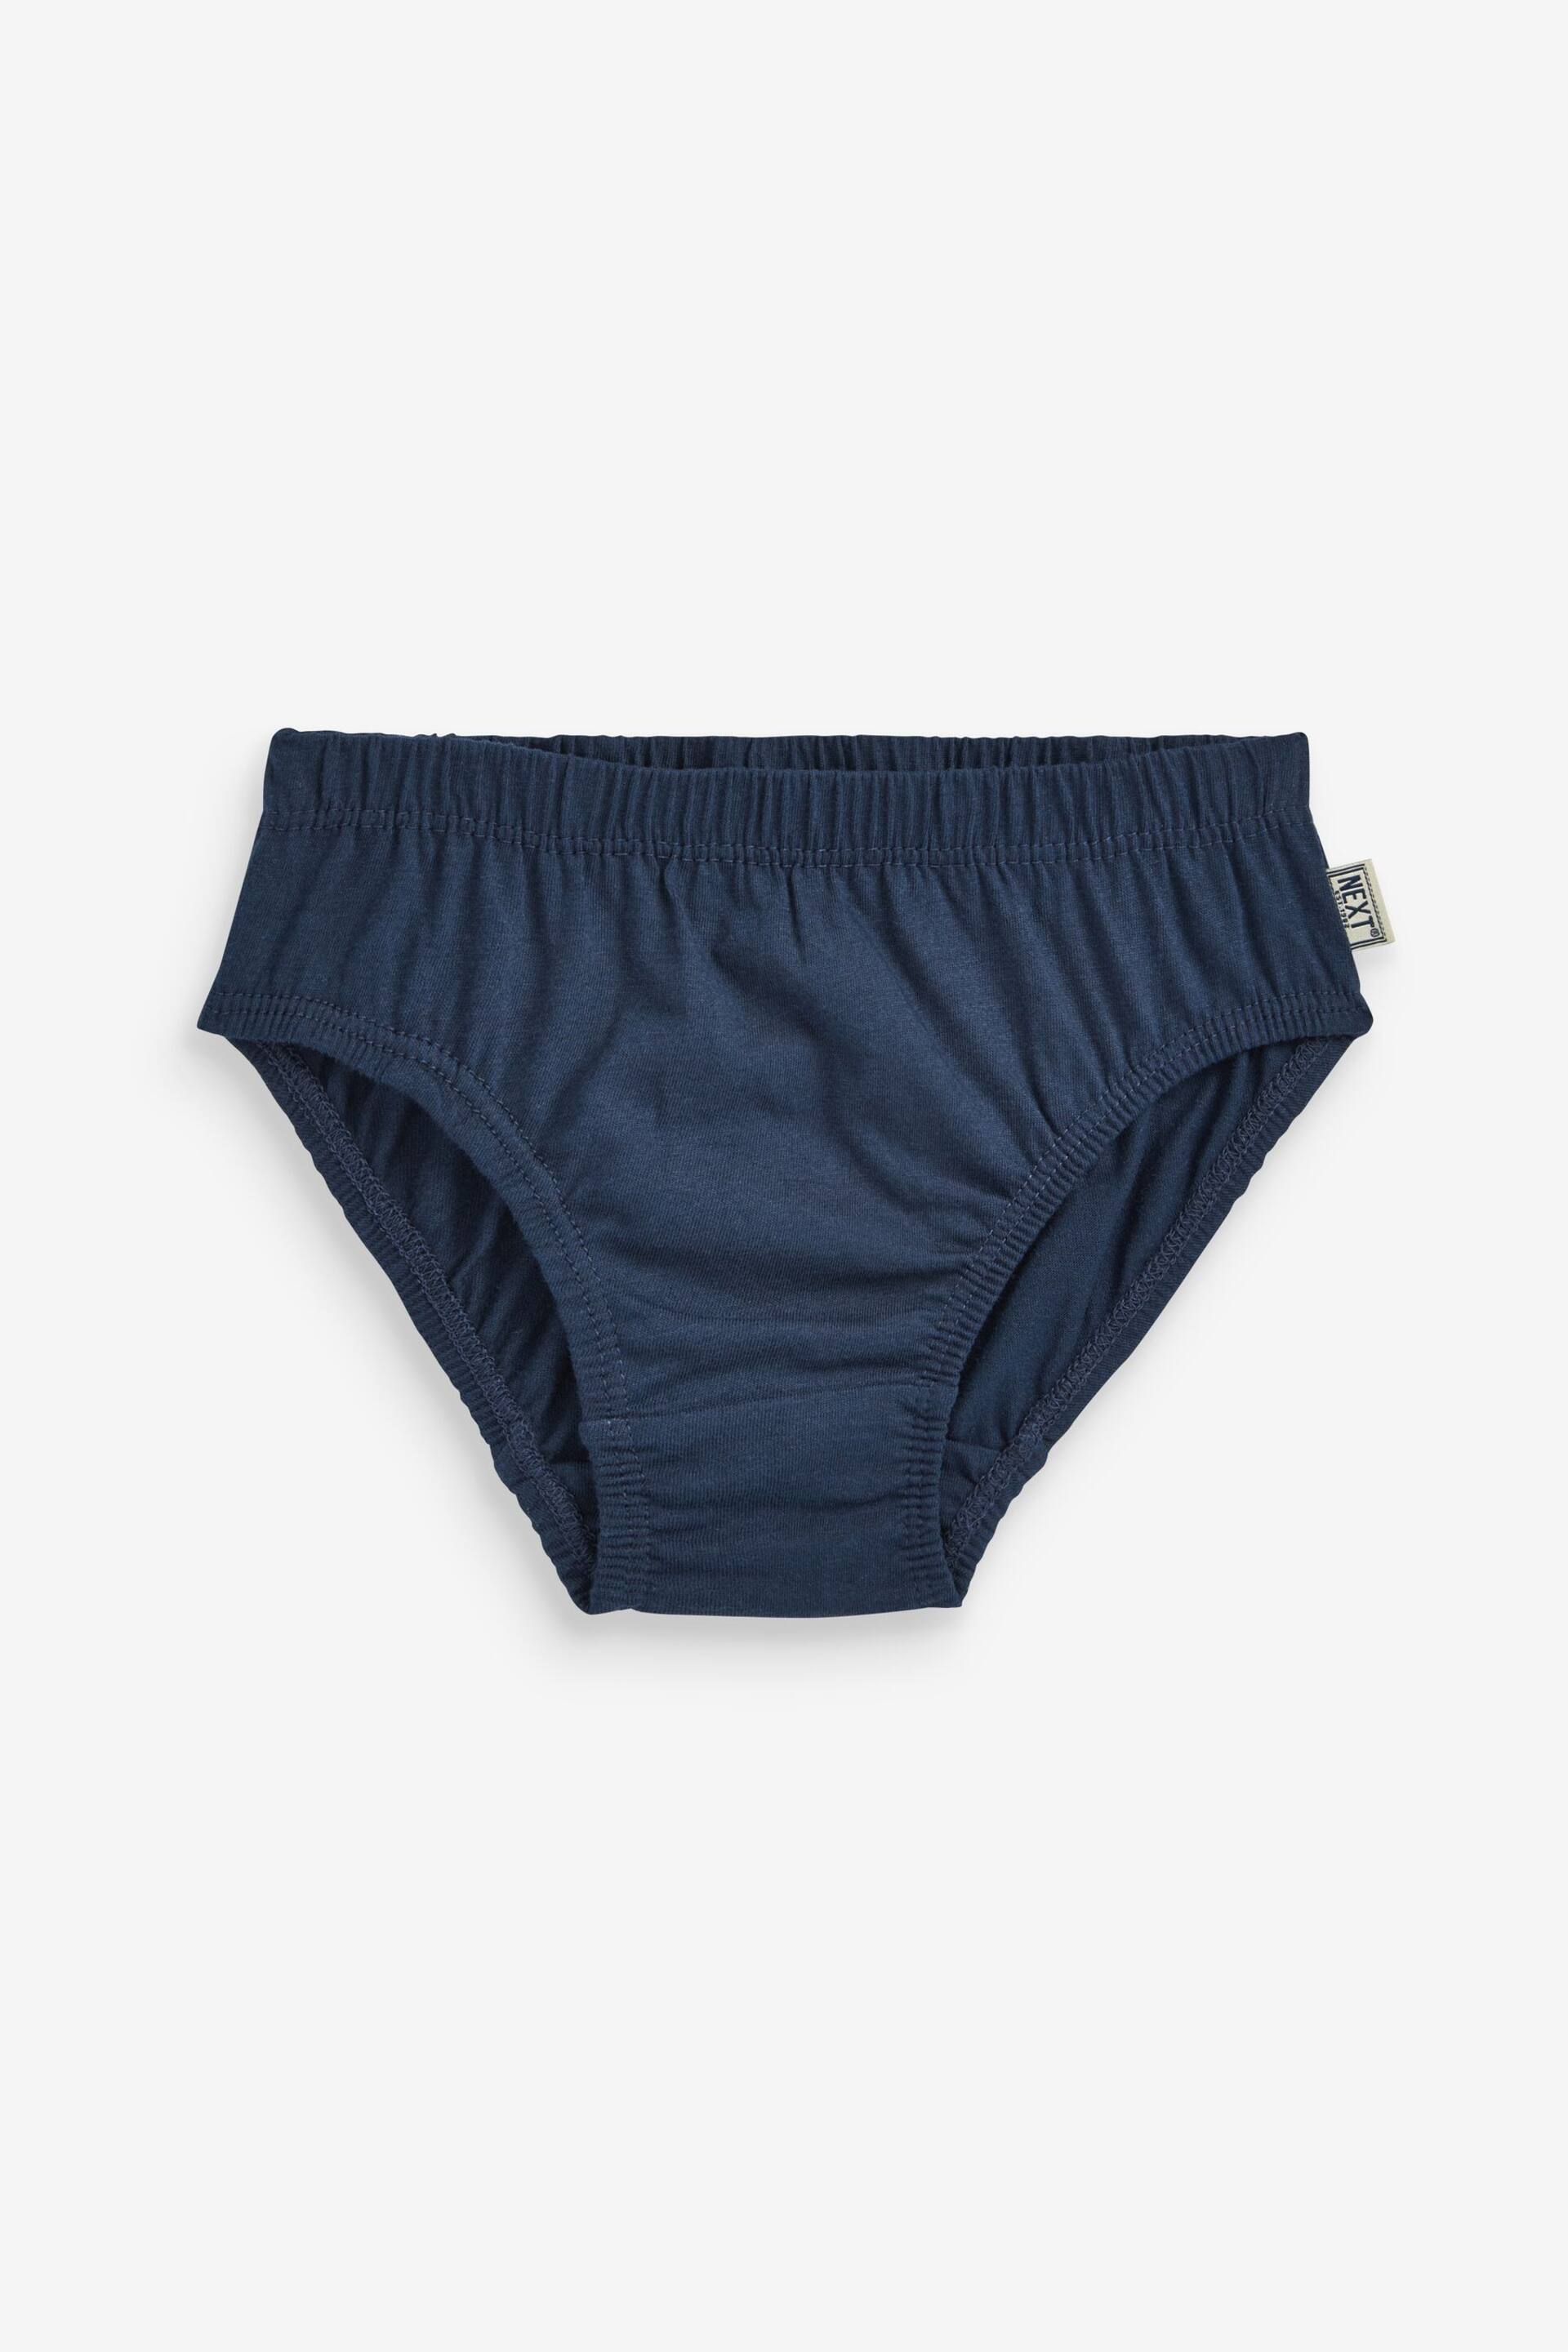 Blue Briefs 10 Pack (1.5-16yrs) - Image 10 of 12